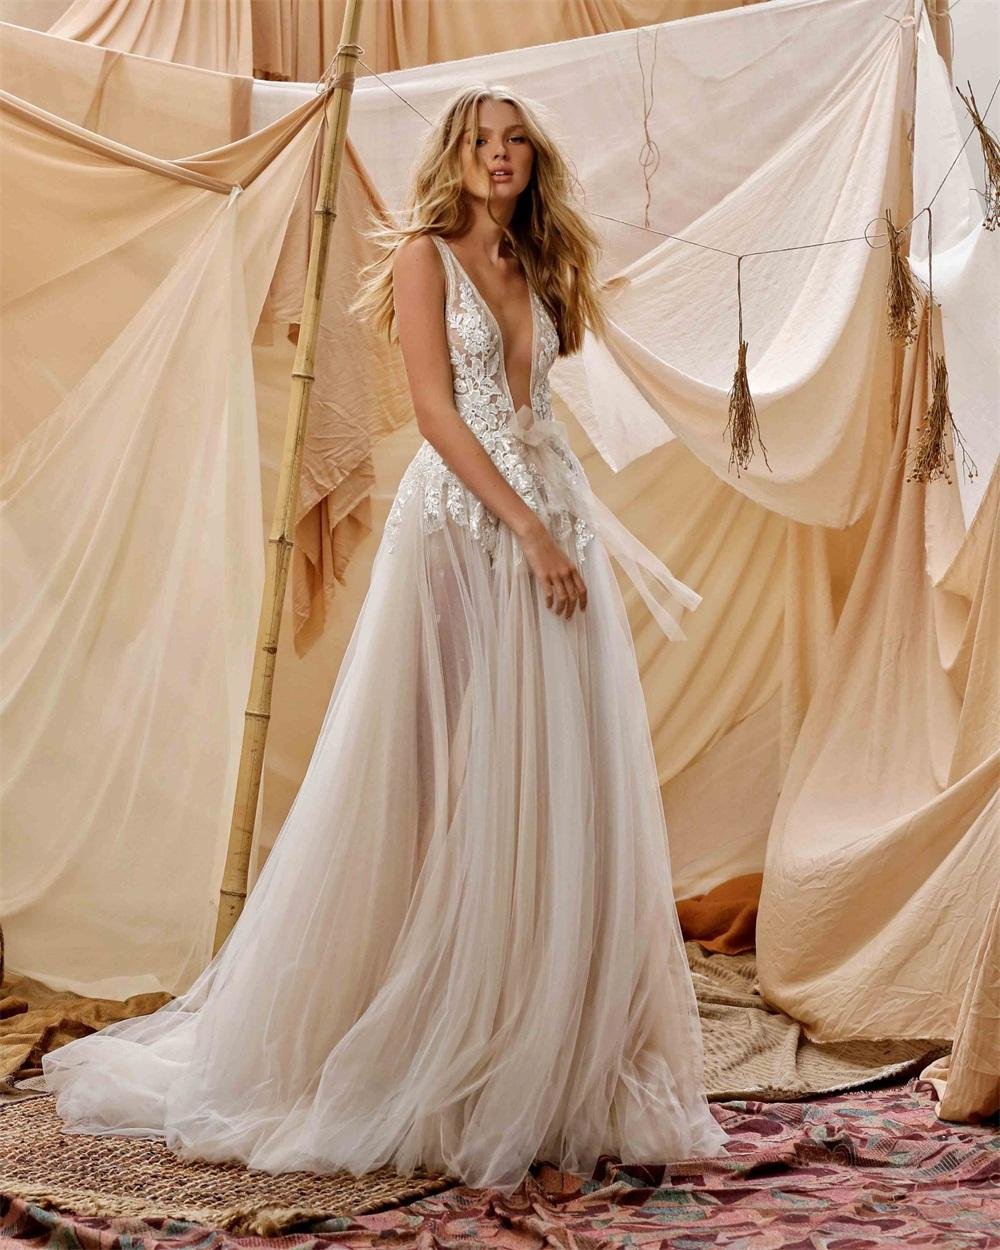 Bohemian Wedding Dress Deep V Neck Lace Appliqued Beads Country Beach Boho Bridal Gowns